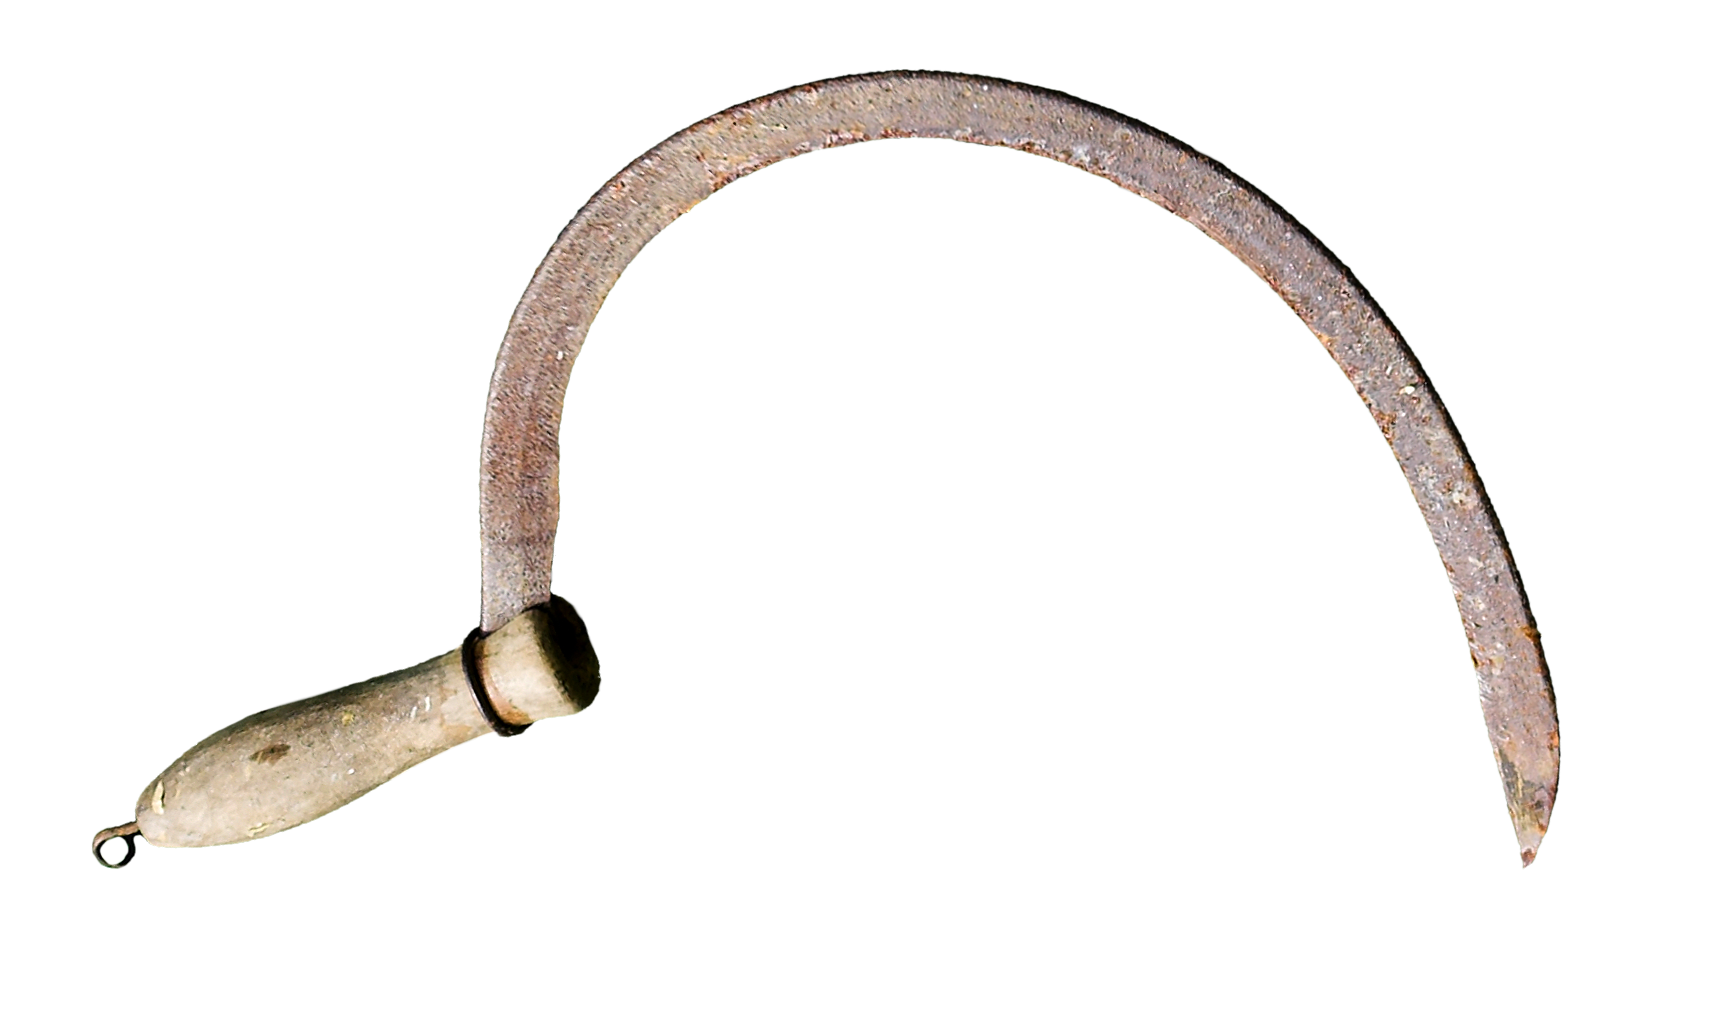 File Sickle Without Background Png Wikimedia Mons